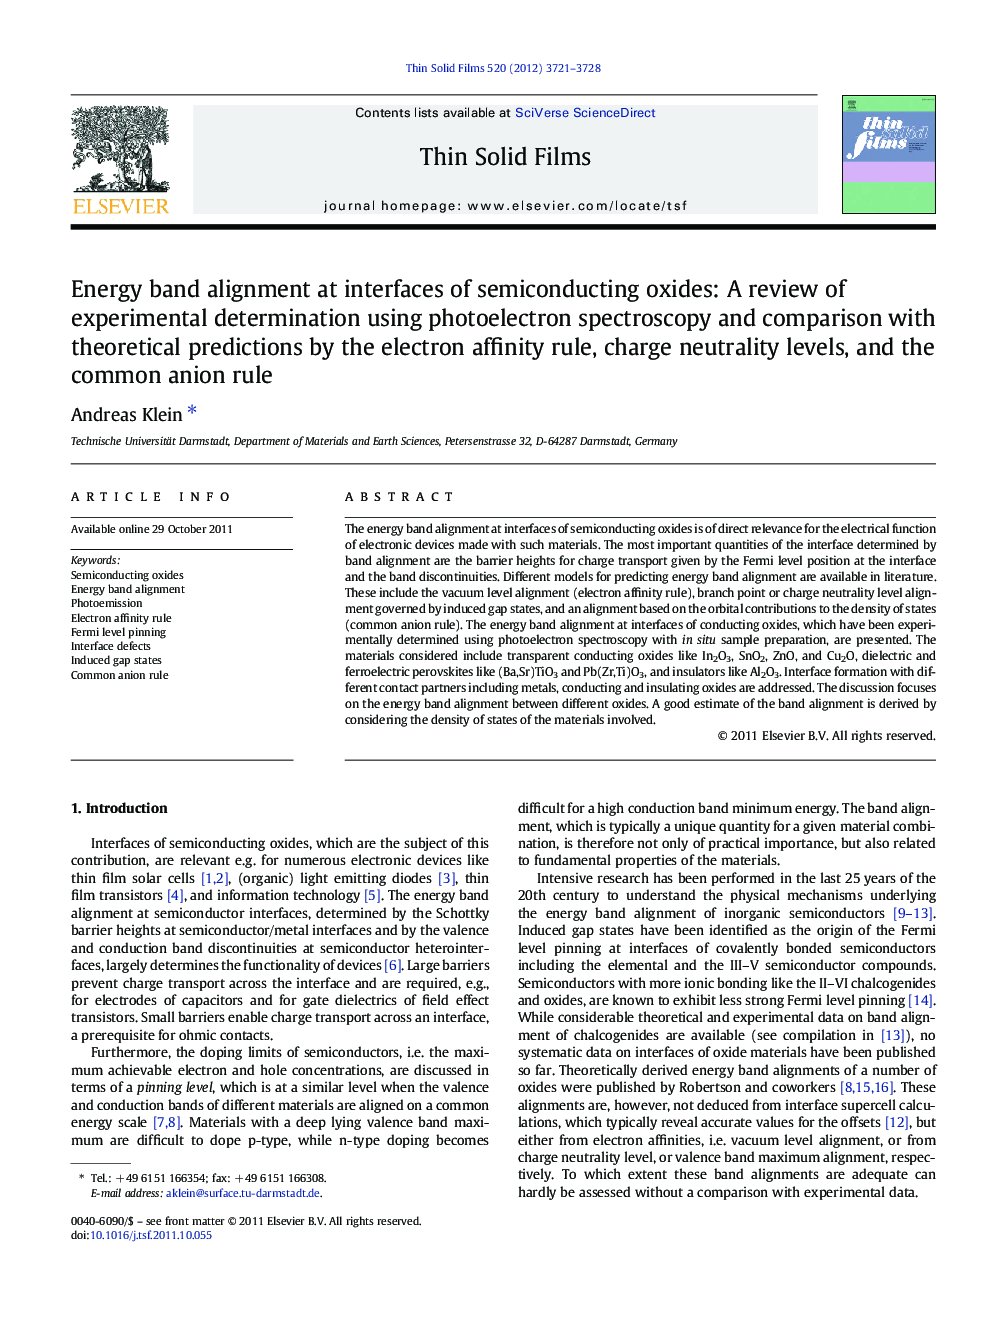 Energy band alignment at interfaces of semiconducting oxides: A review of experimental determination using photoelectron spectroscopy and comparison with theoretical predictions by the electron affinity rule, charge neutrality levels, and the common anion